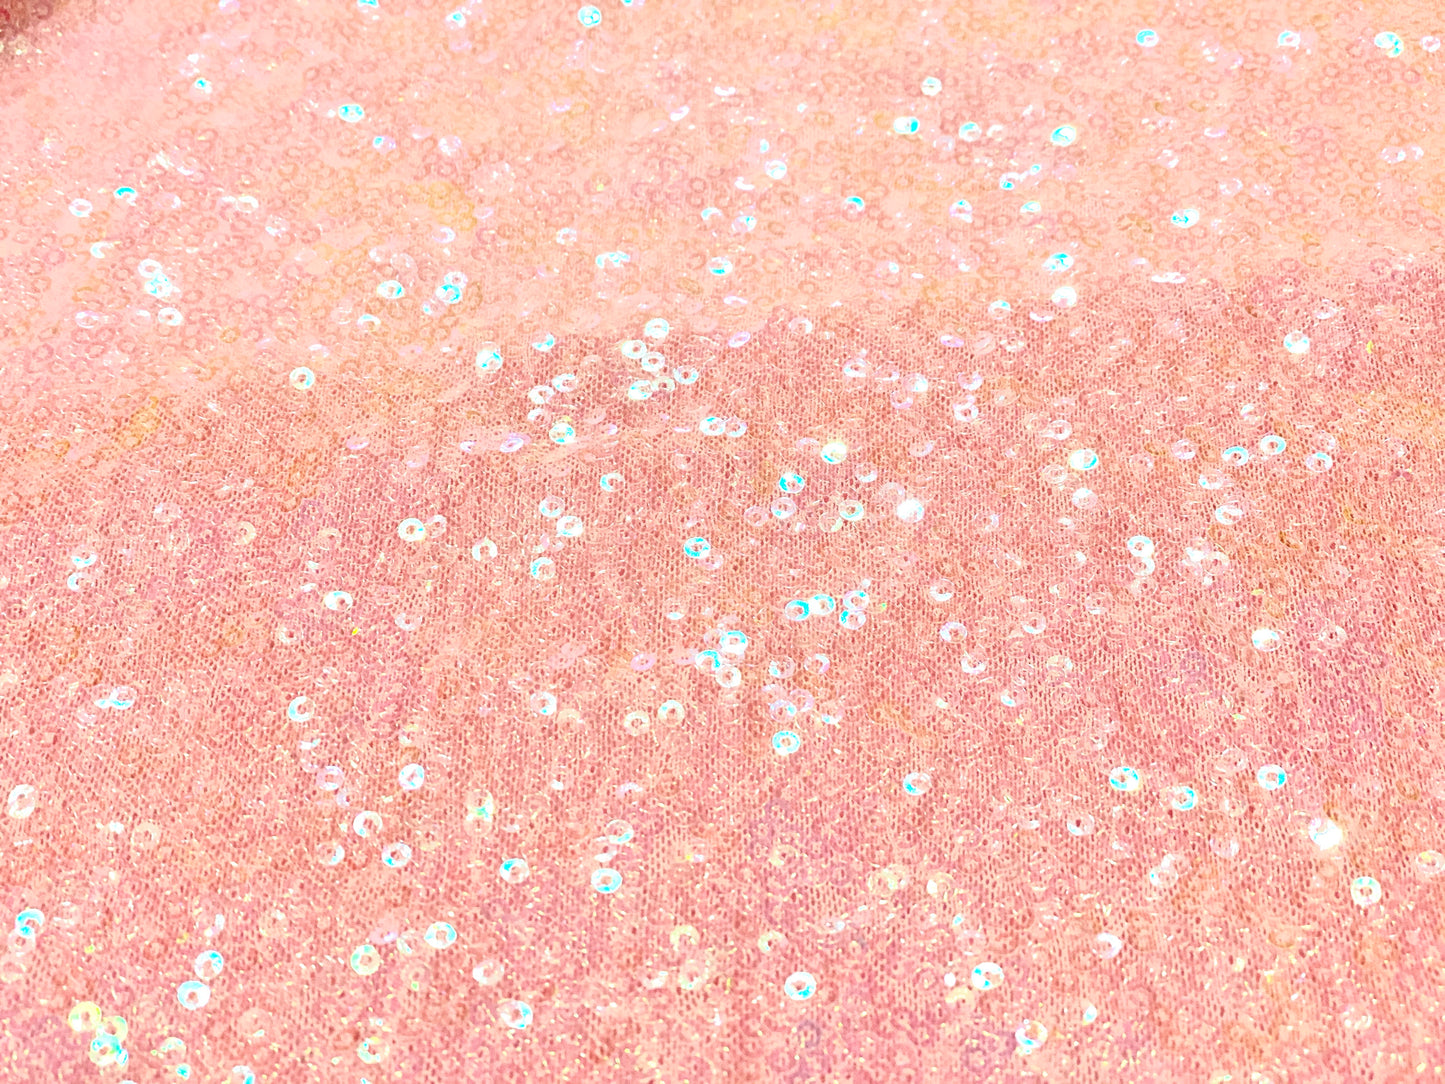 Face Coverings Pink Sequin